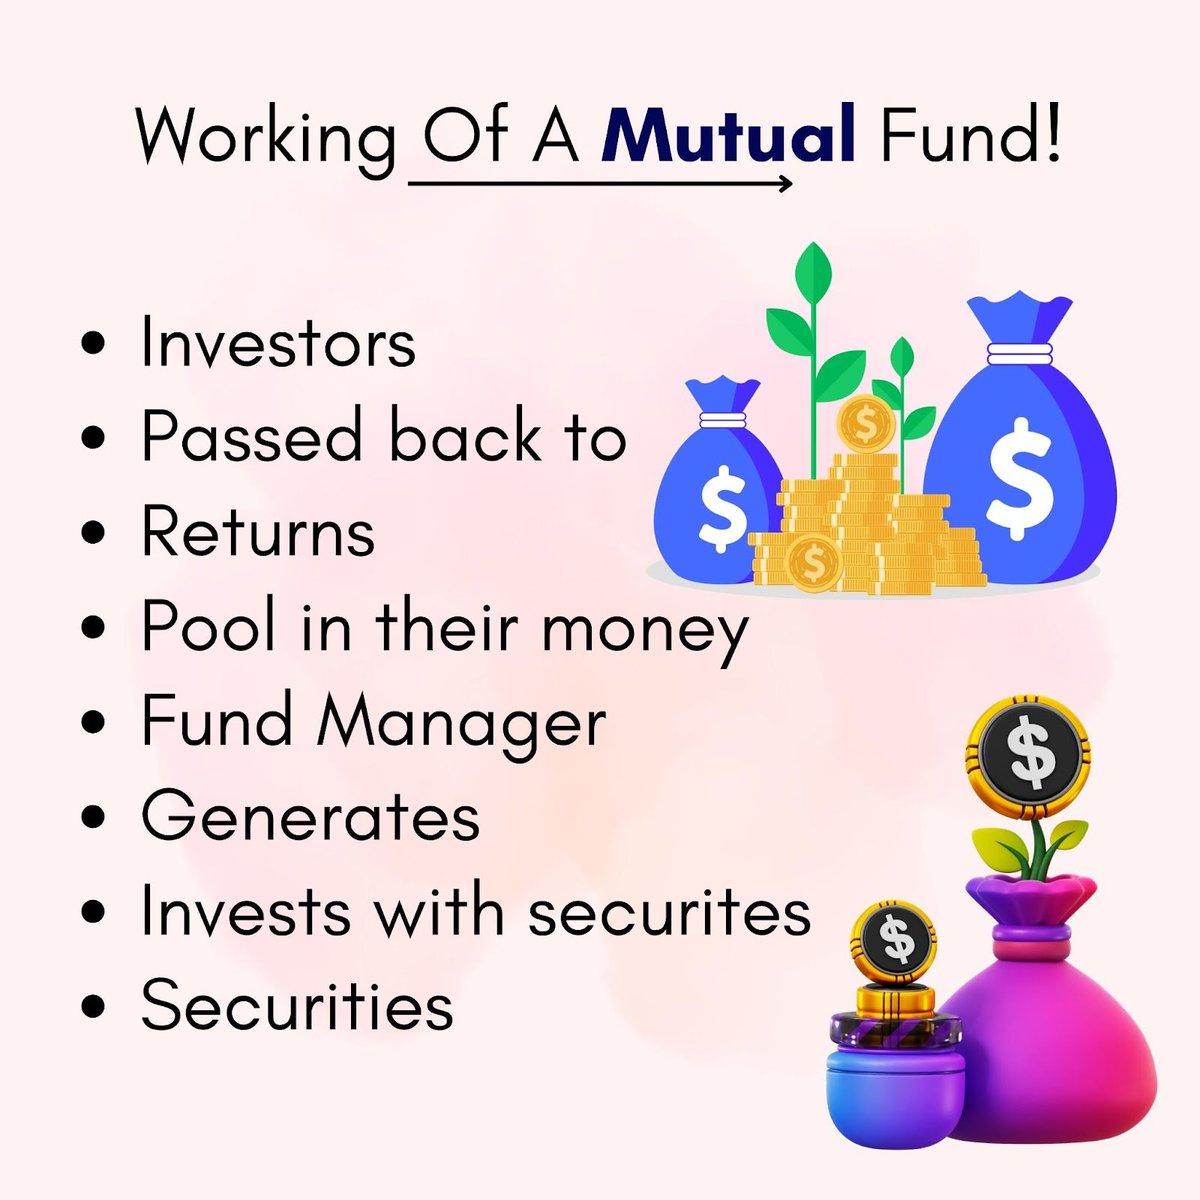 Mutual funds operate by pooling money from multiple investors to create a diversified portfolio of investments. Skilled fund managers oversee the funds, making strategic investment decisions to align with the fund's objectives.
.
#financialgoals #investing101 #indexfundinvesting